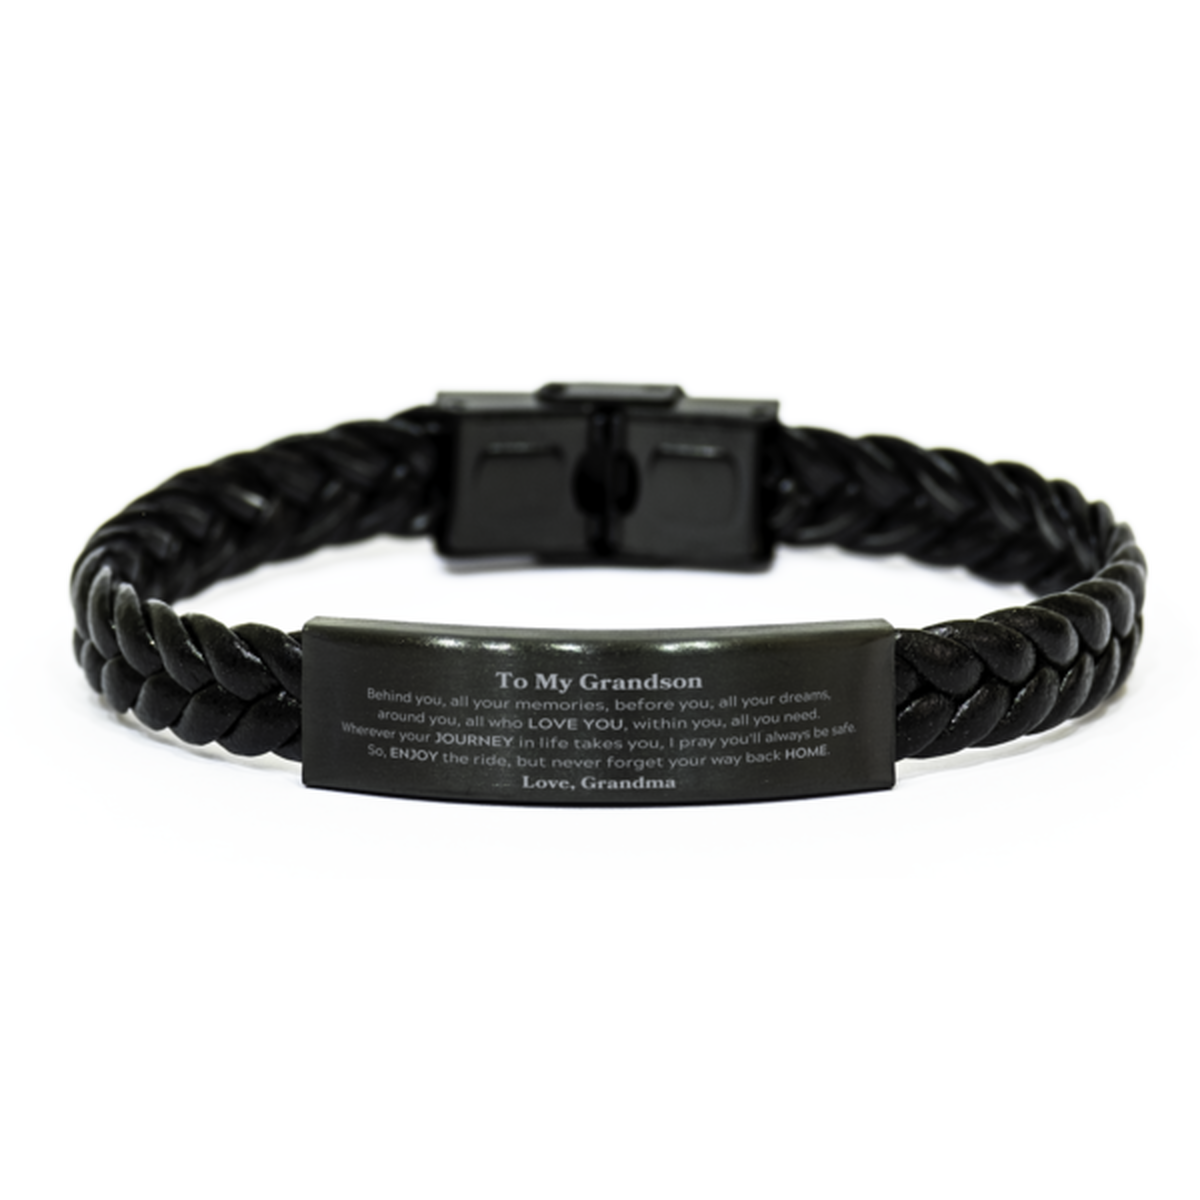 To My Grandson Graduation Gifts from Grandma, Grandson Braided Leather Bracelet Christmas Birthday Gifts for Grandson Behind you, all your memories, before you, all your dreams. Love, Grandma